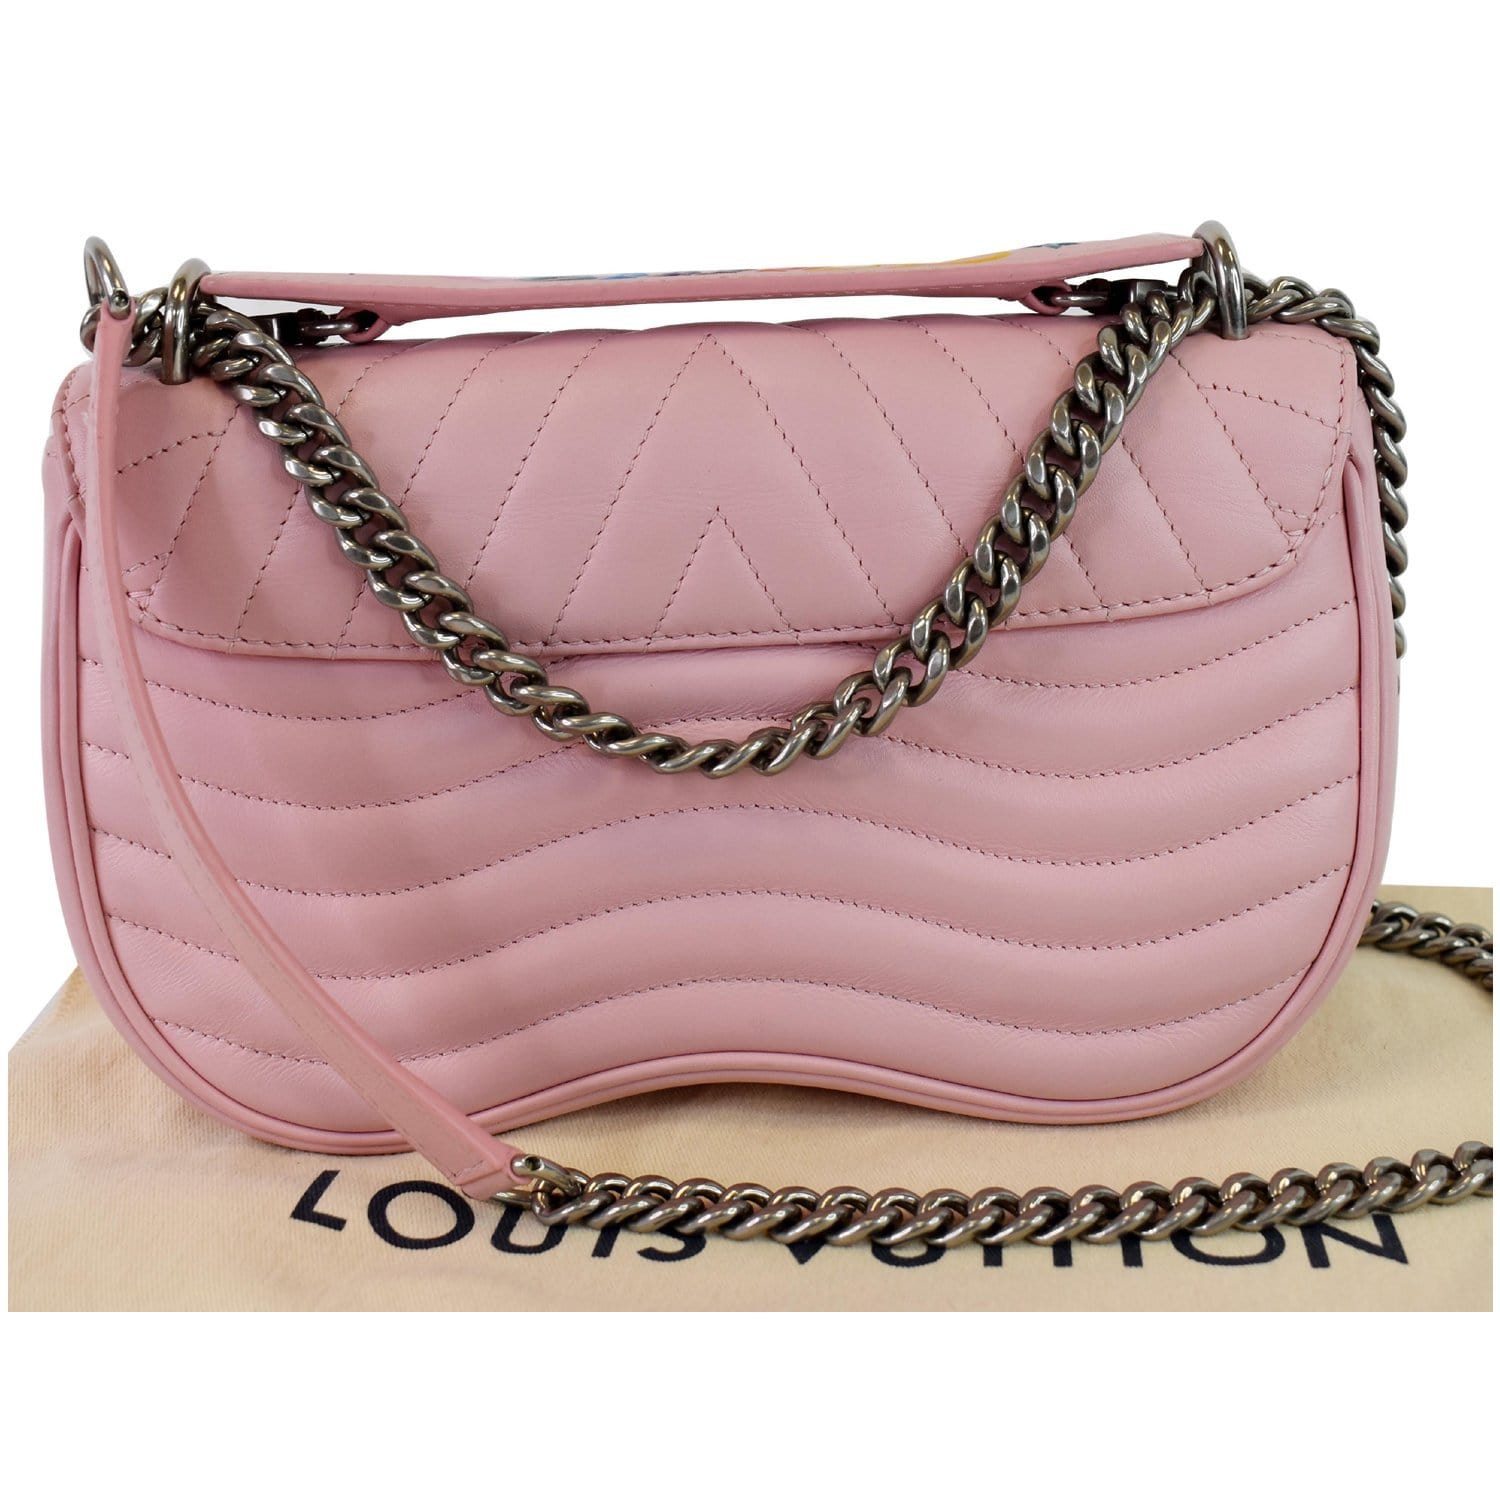 New wave leather handbag Louis Vuitton Pink in Leather - 37421025